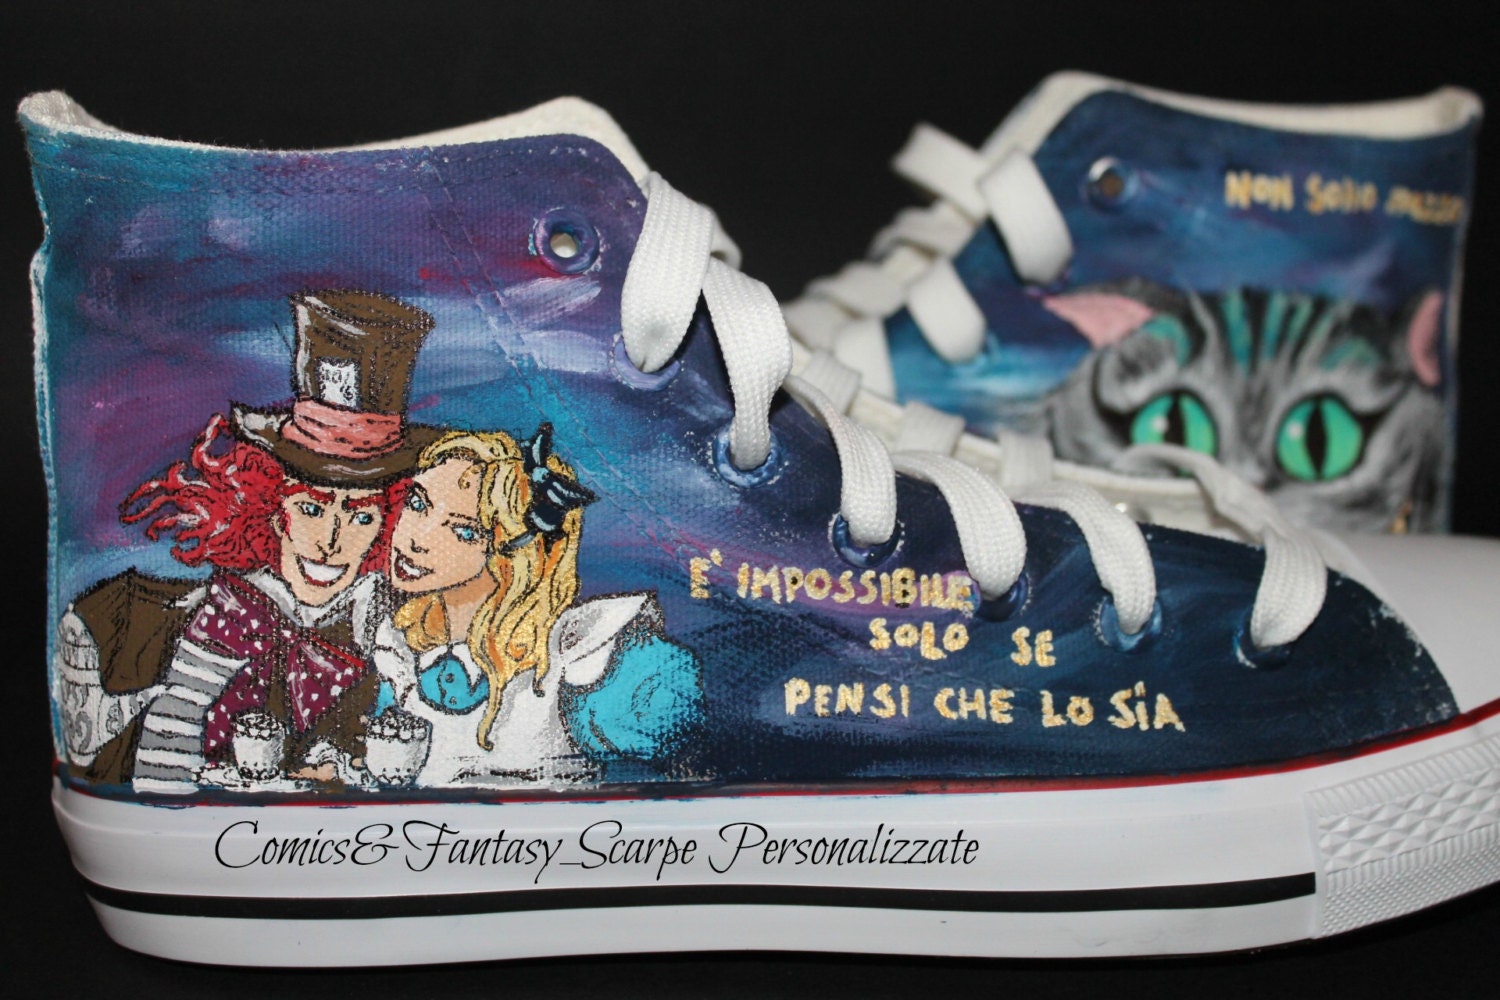 Custom Shoes Hand Painted not Printed High Top Converse Alice in Wonderland  Cheshire Cat Designs 2 full pieces of art painted just for you